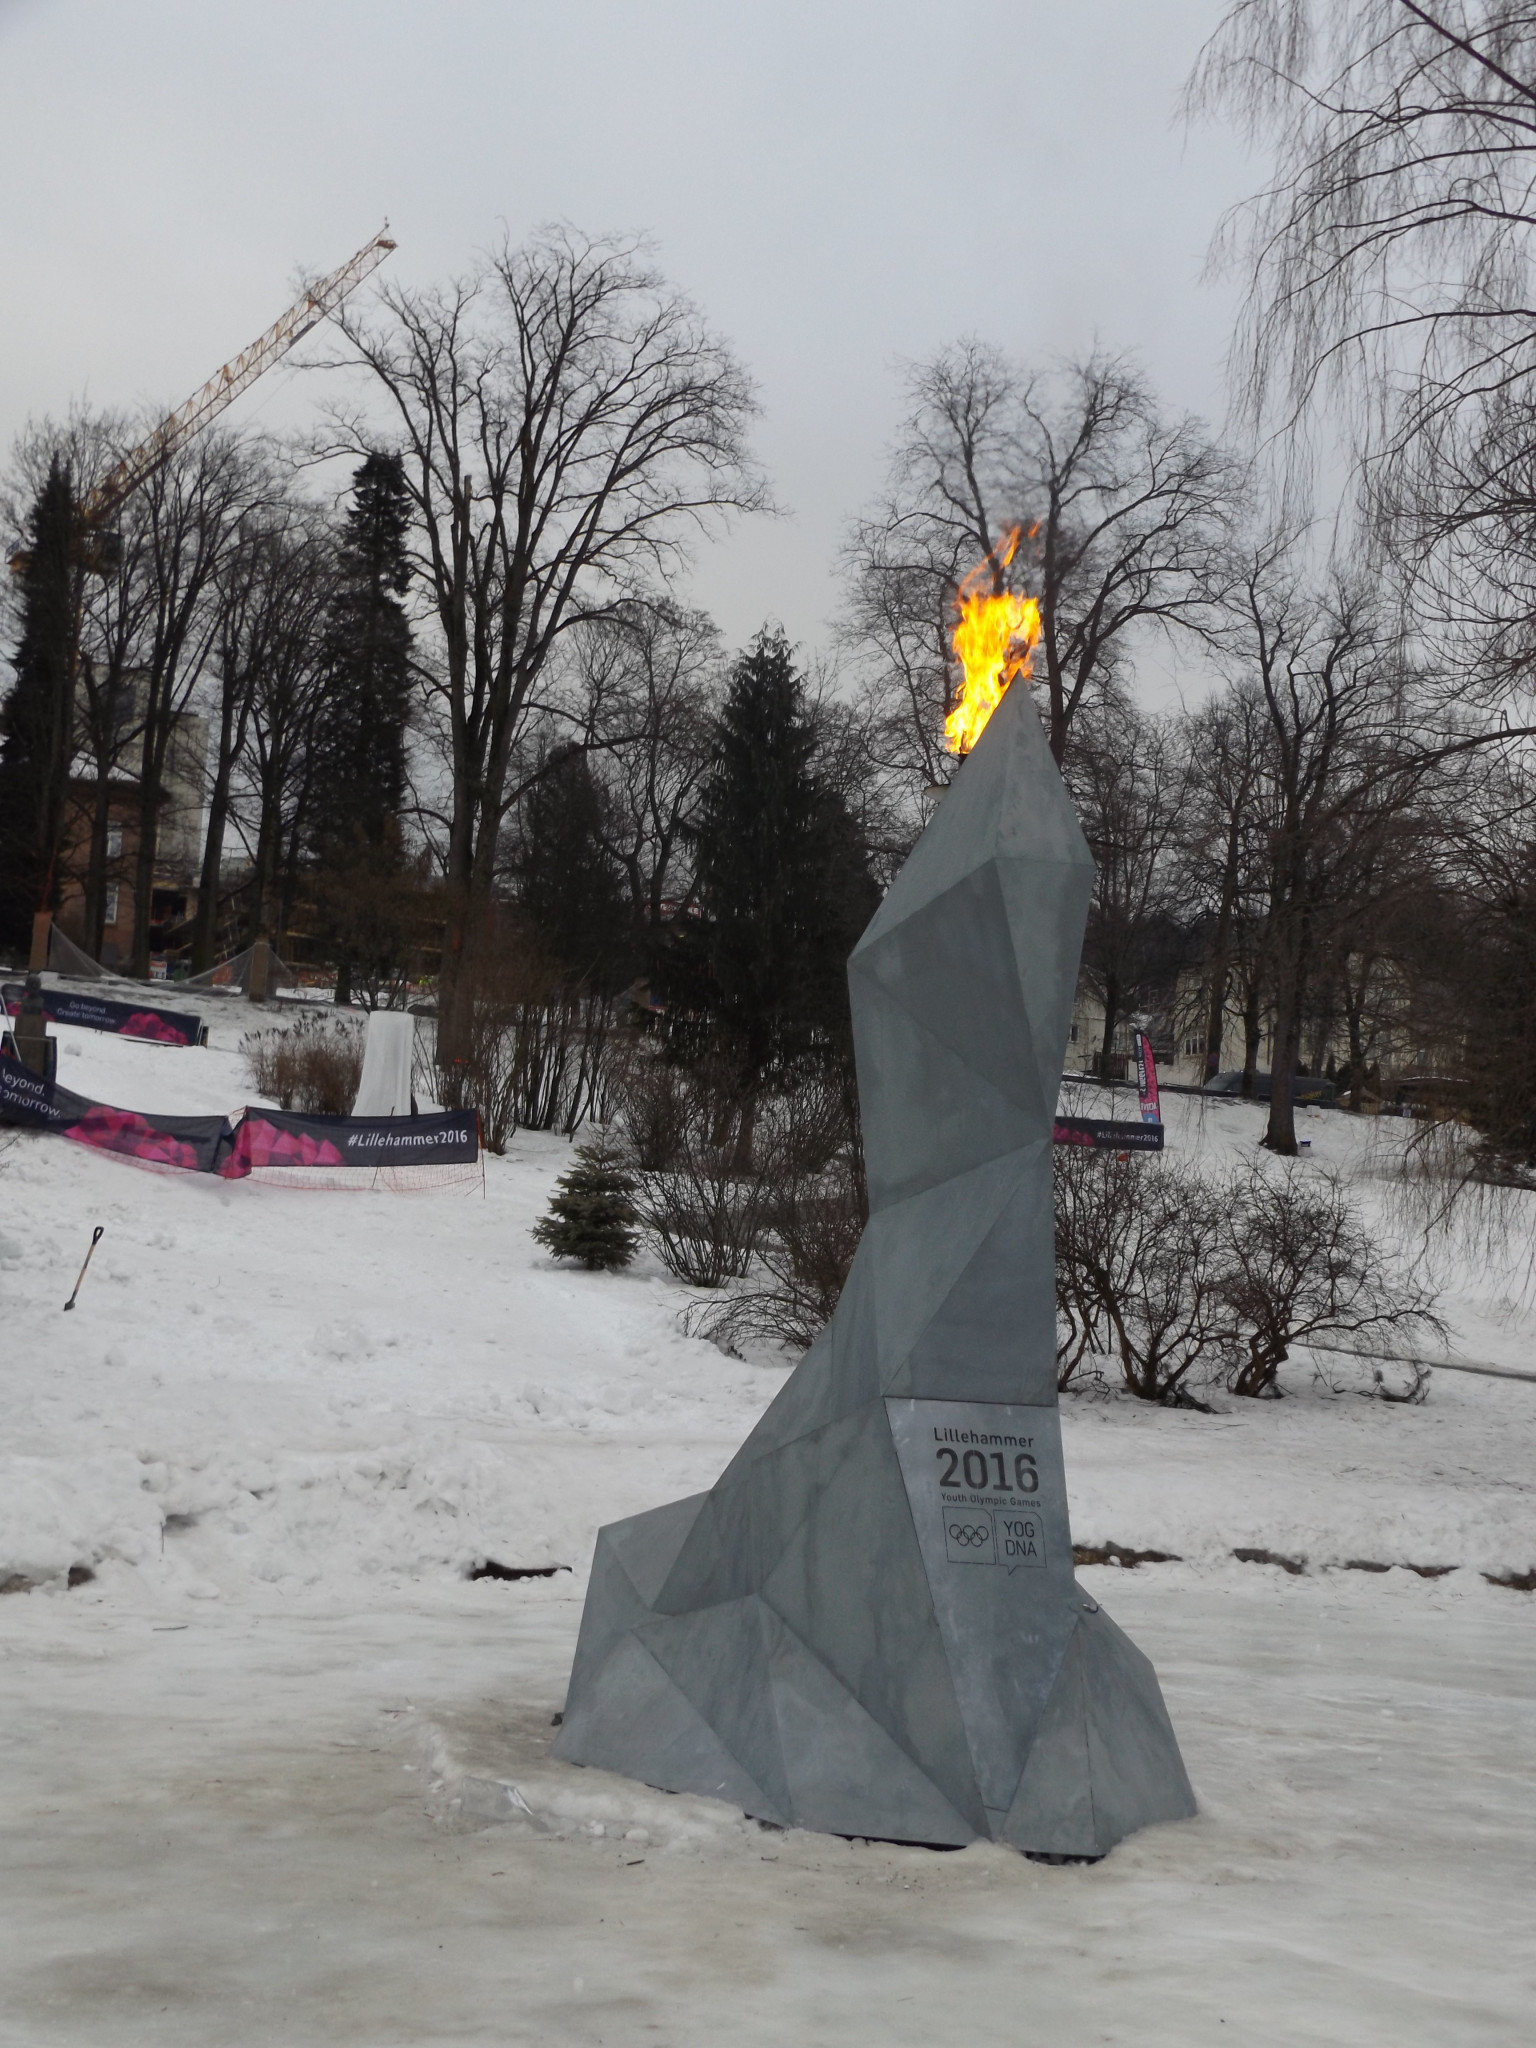 The flame for the Youth Winter Olympic Games in Lillehammer ©ITG